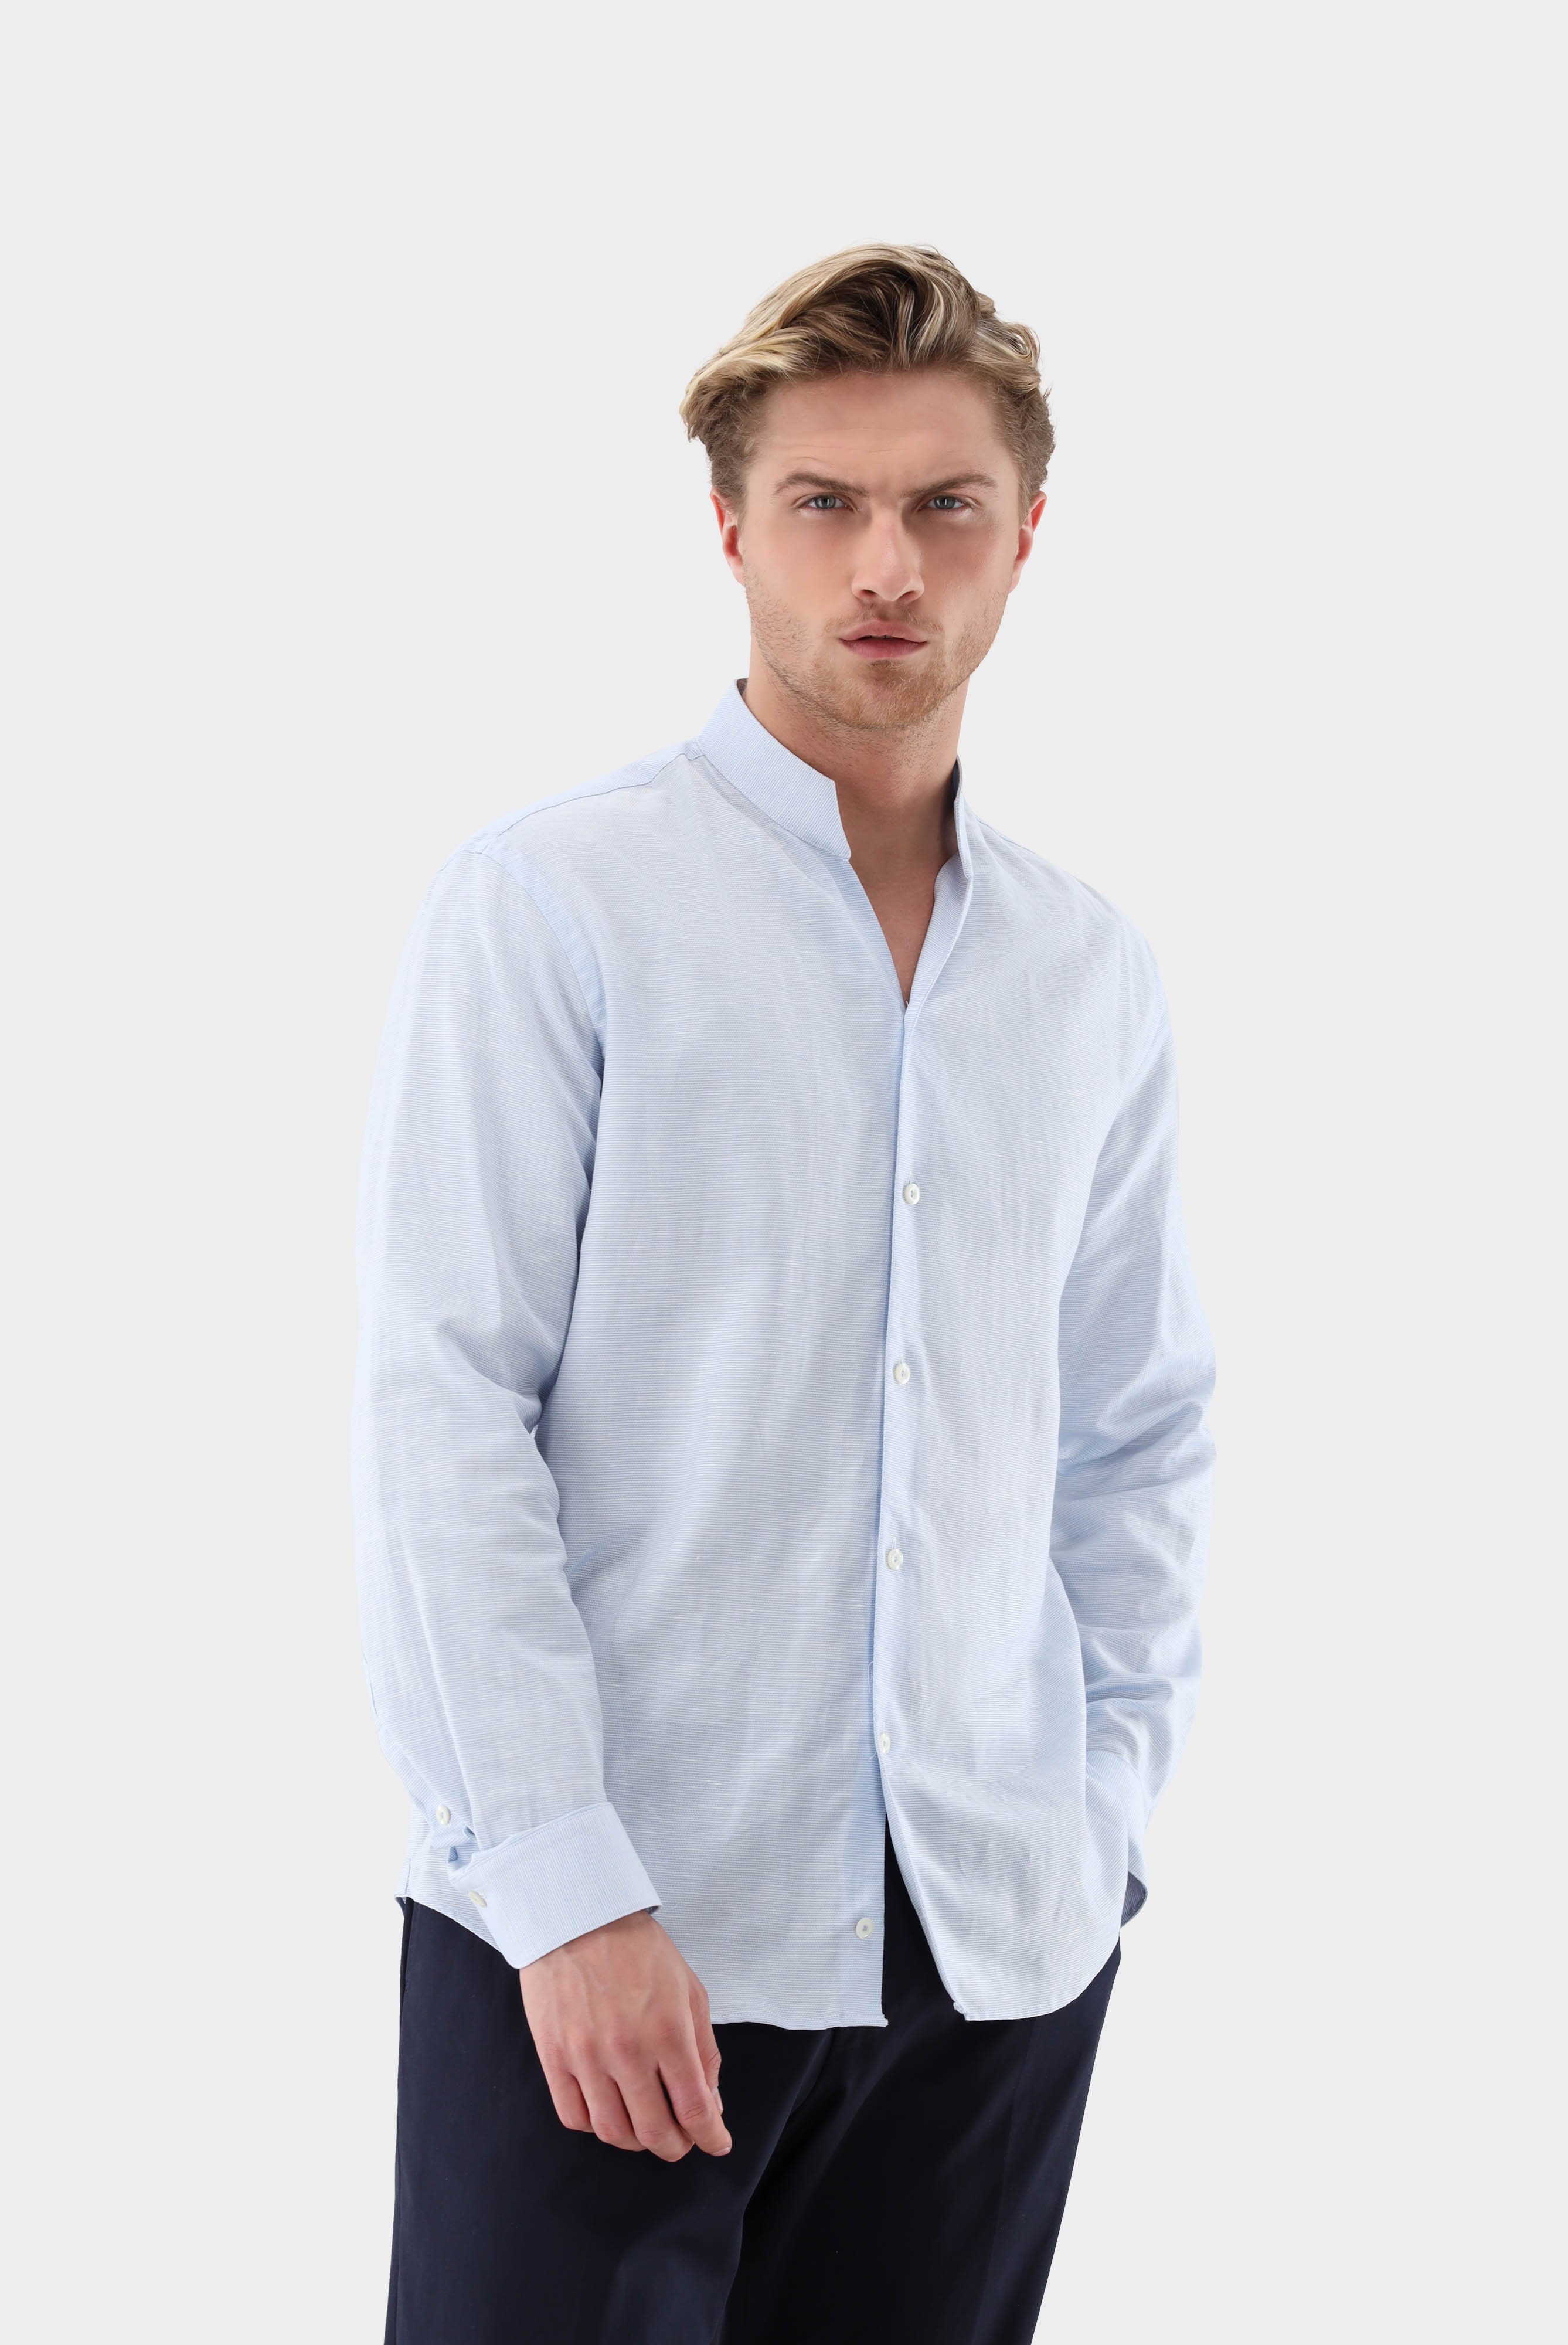 Casual Shirts+Structured stand-up collar shirt made of cotton and linen+20.2073.AV.150302.720.S